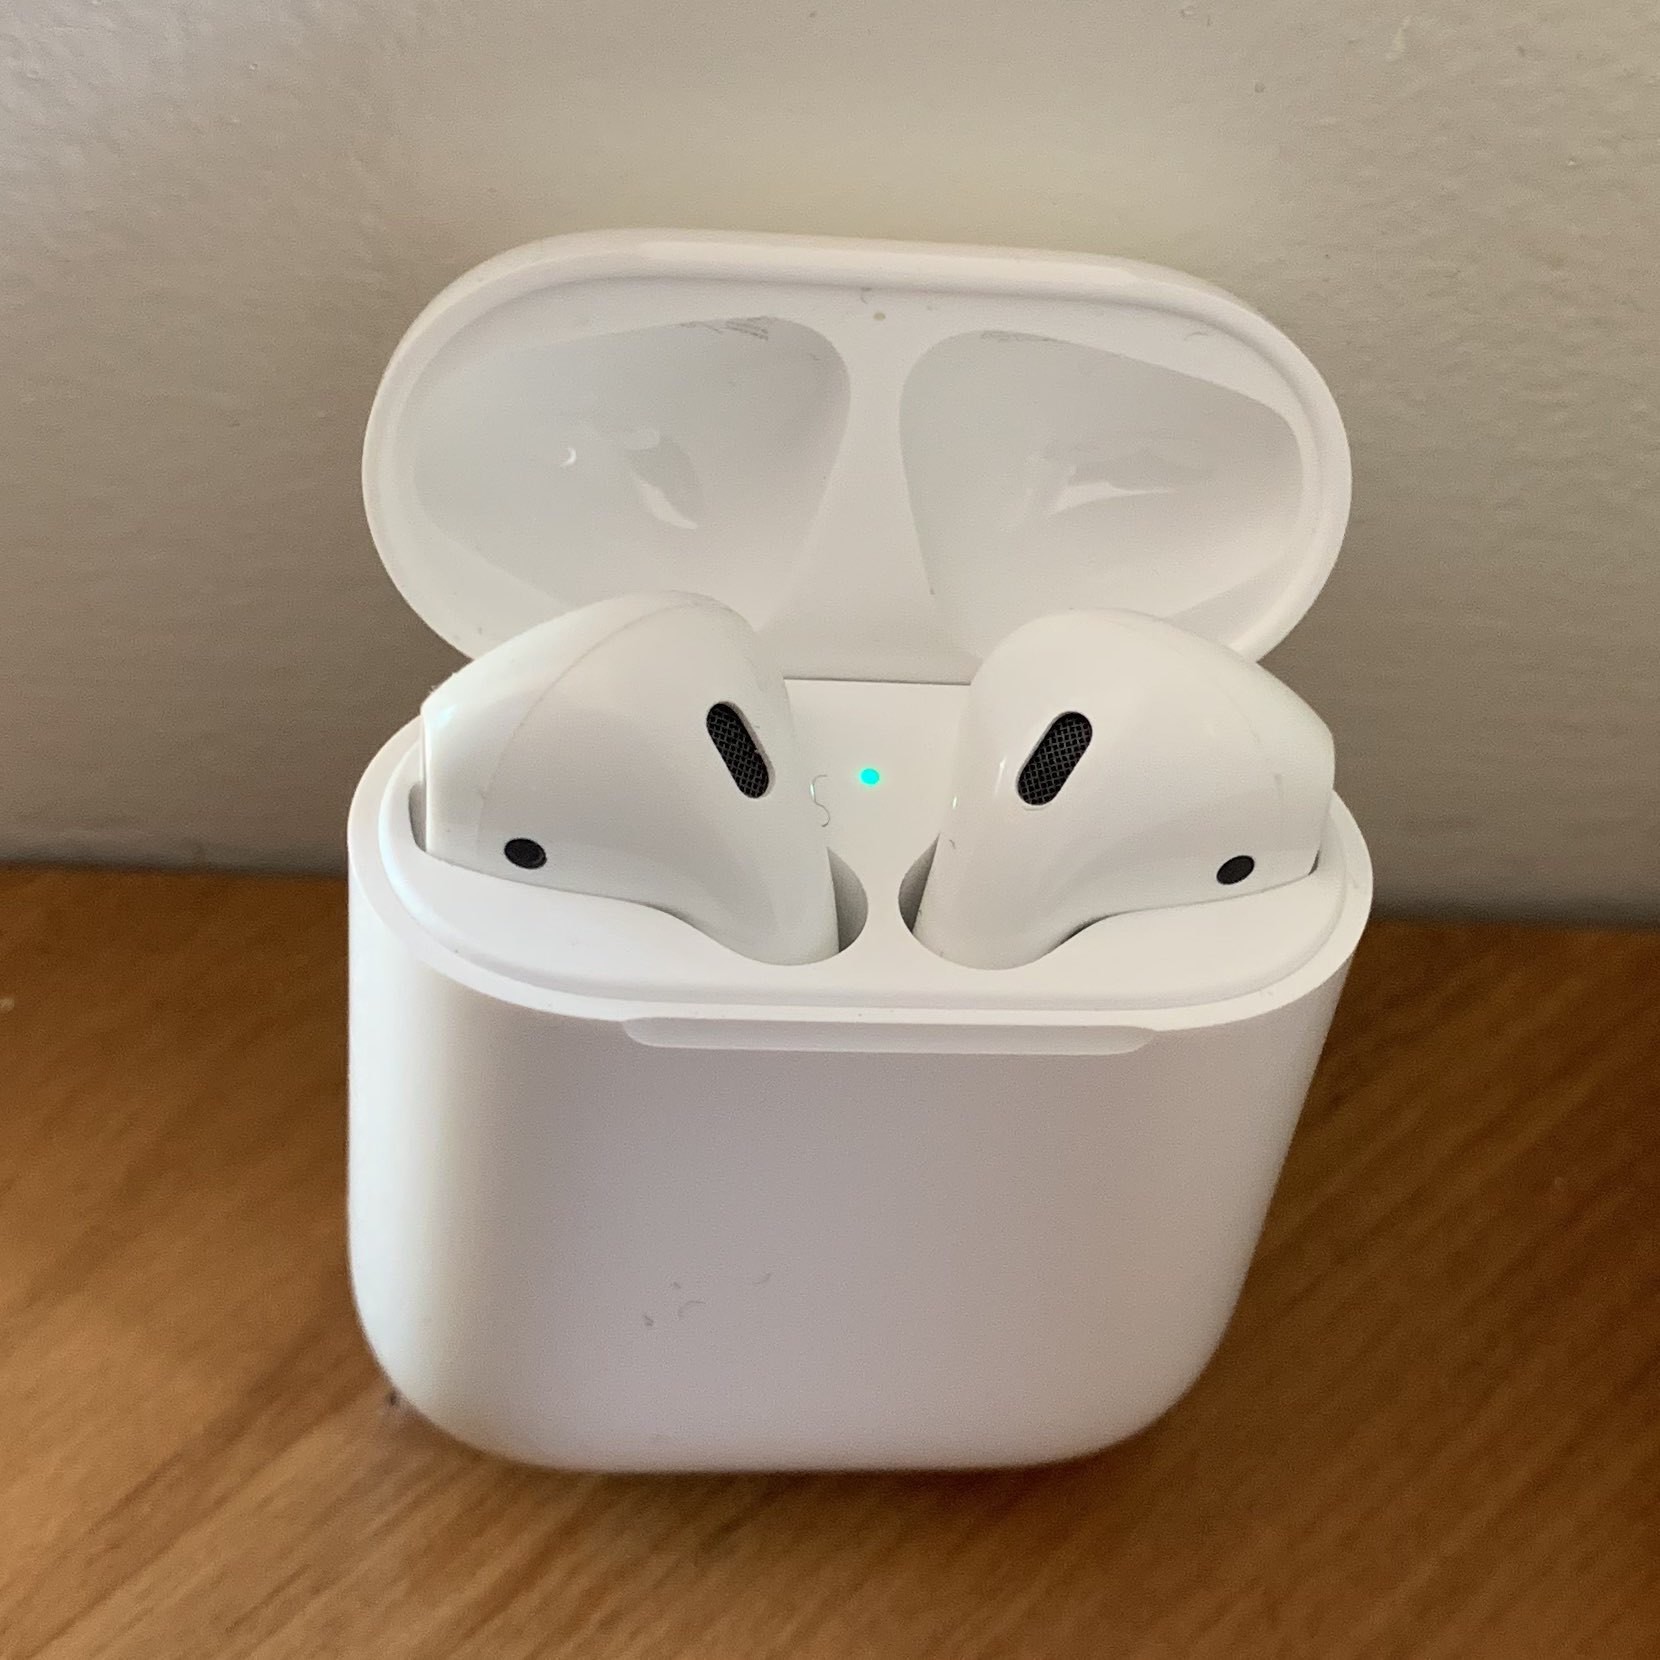 My new Airpods 2. 